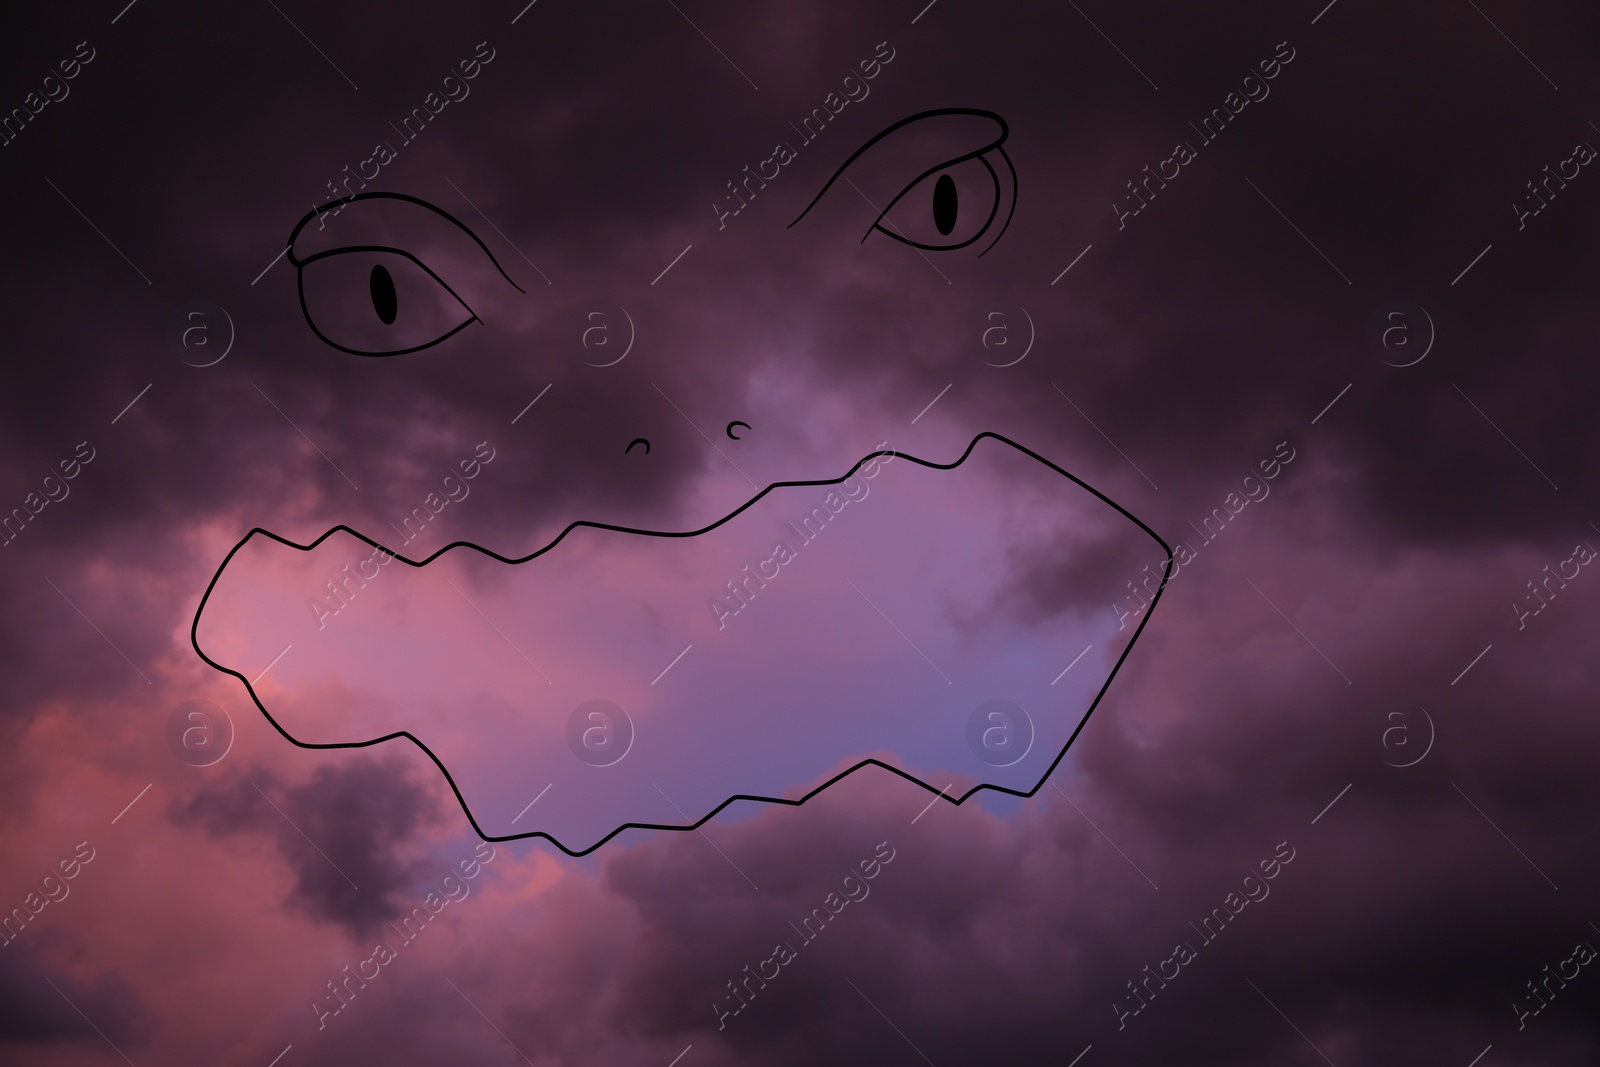 Image of Imagination and creativity. Fluffy cloud resembling scary face in sky, drawn outline